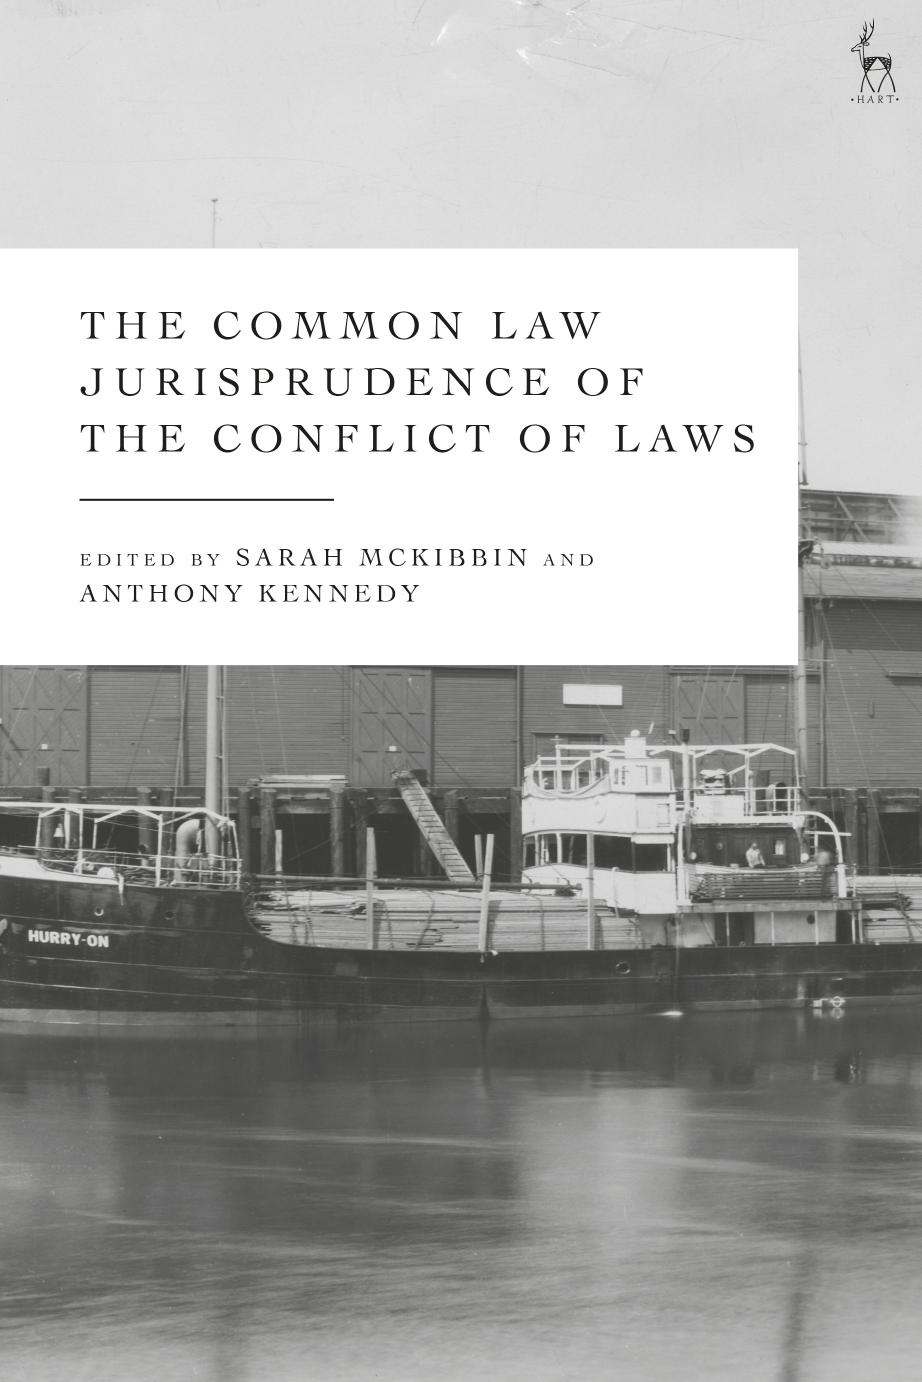 The Common Law Jurisprudence of the Conflict of Laws by Sarah McKibbin Anthony Kennedy